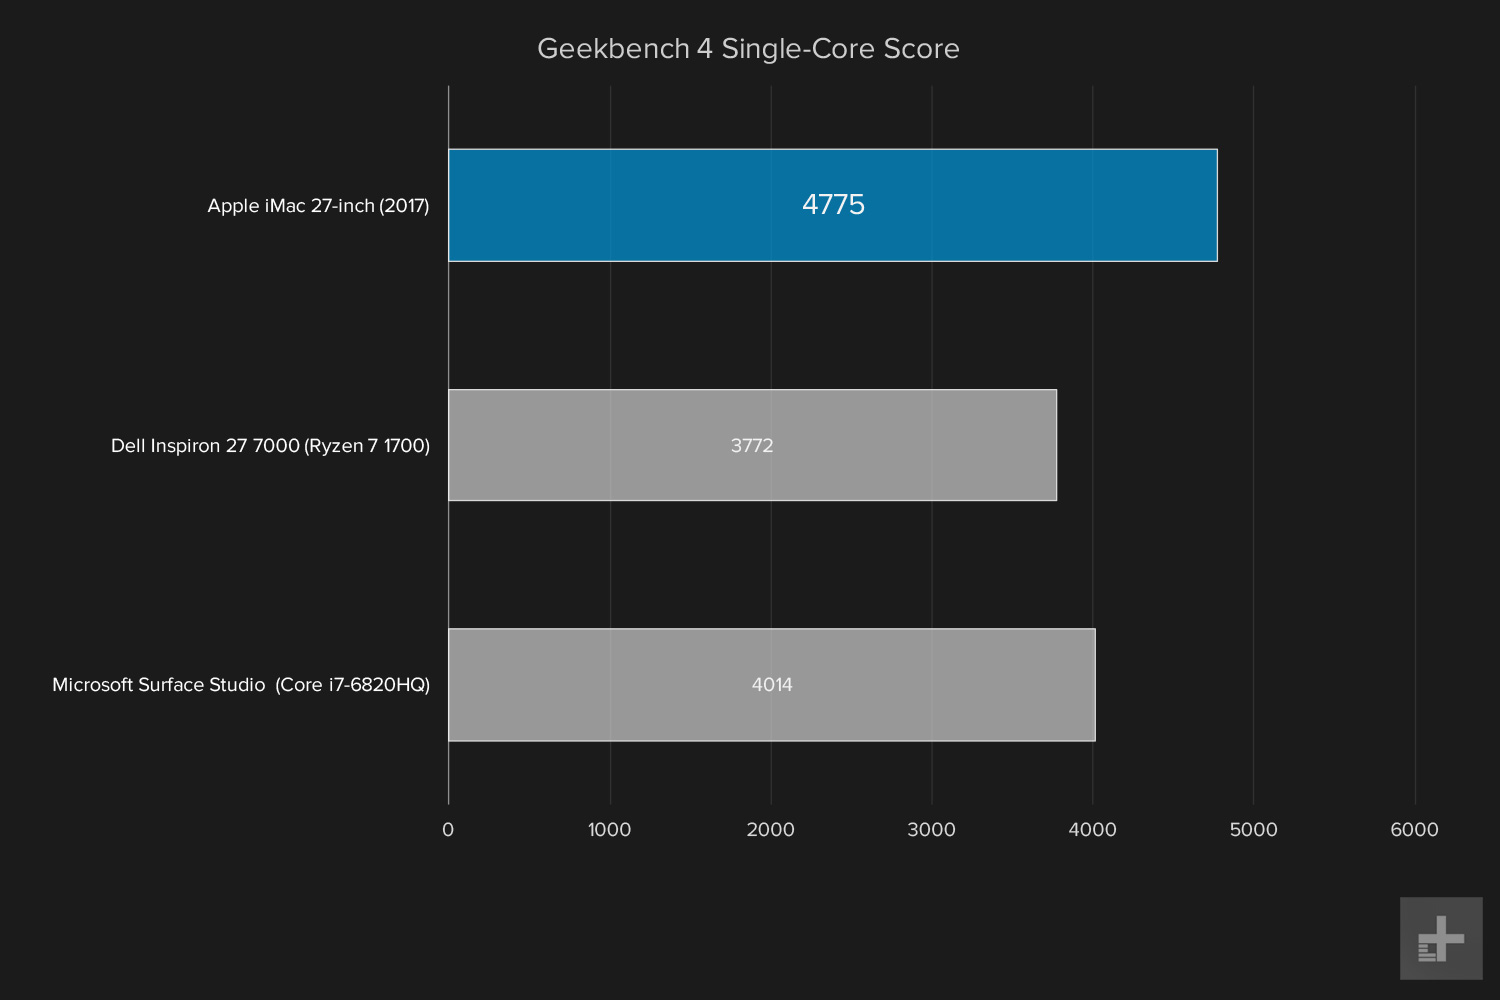 apple imac with retina display review 2017 graph geekbench single